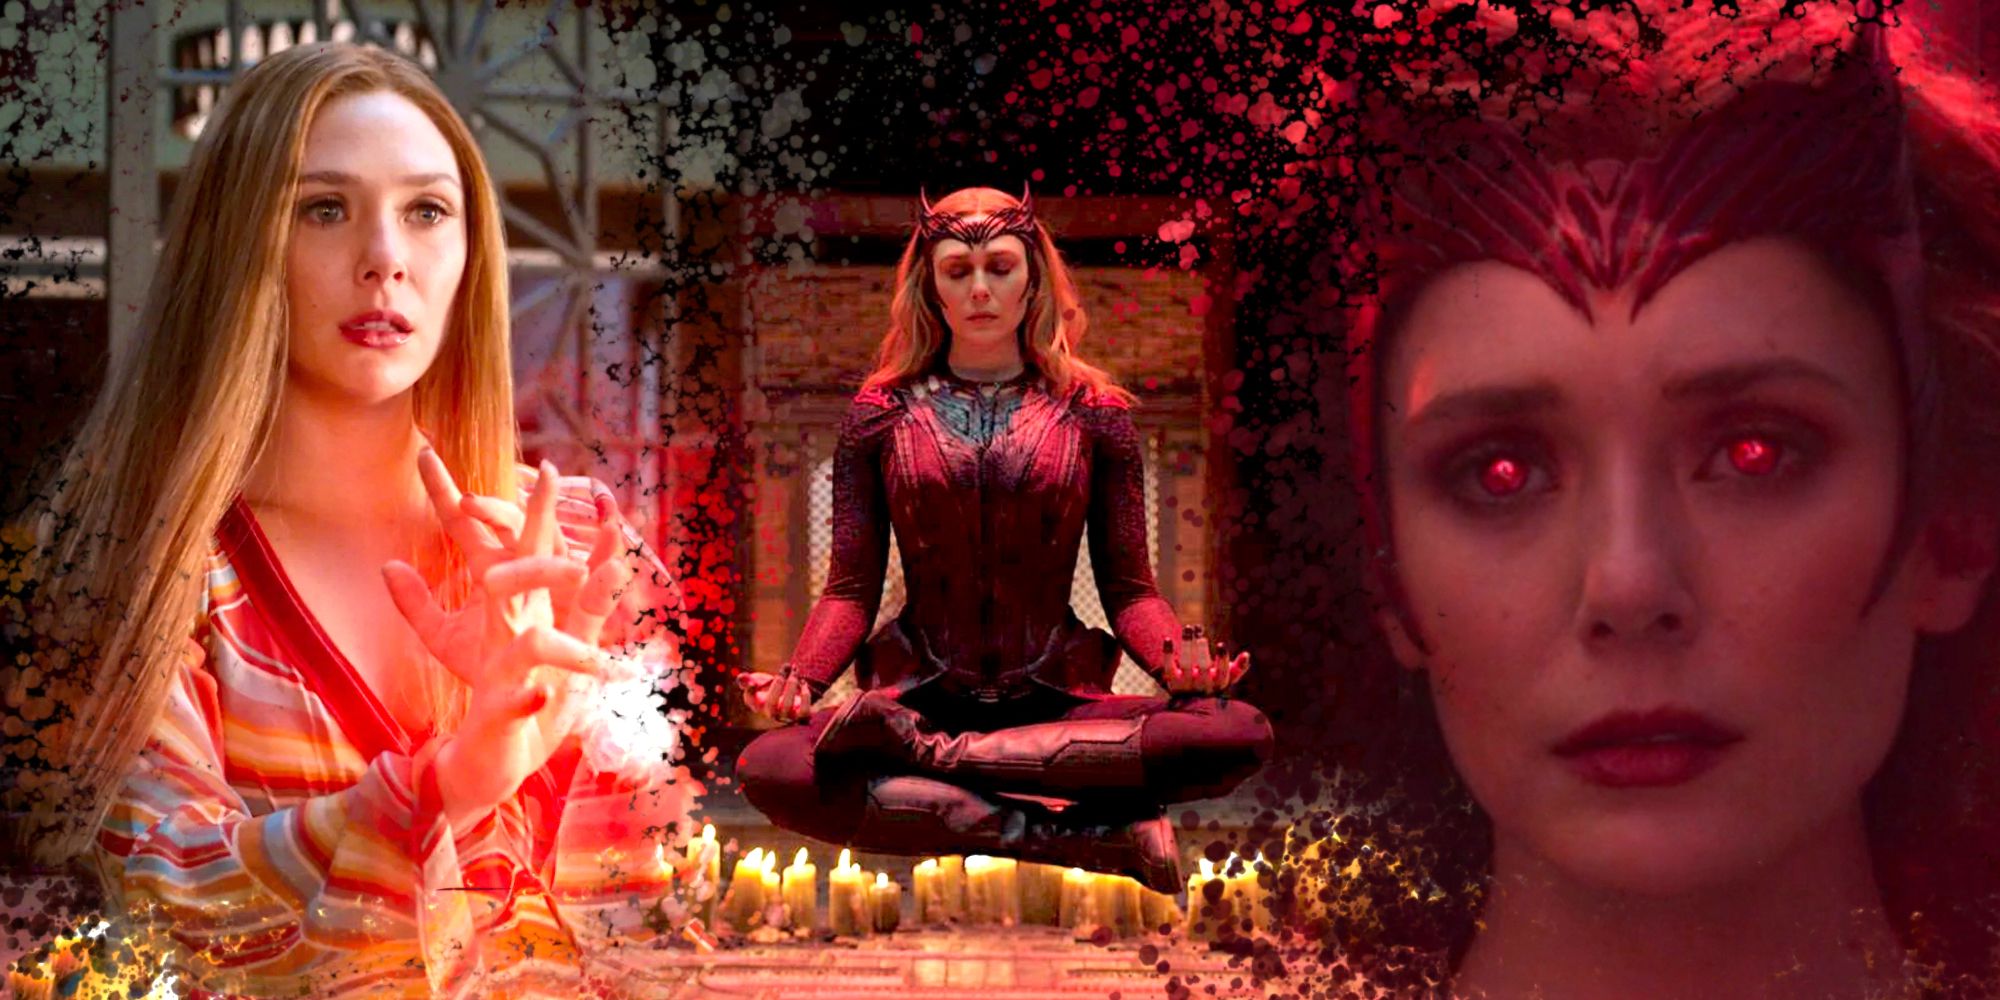 Elizabeth Olsen's Wanda Maximoff/Scarlet Witch in WandaVision and Doctor Strange in the Multiverse of Madness